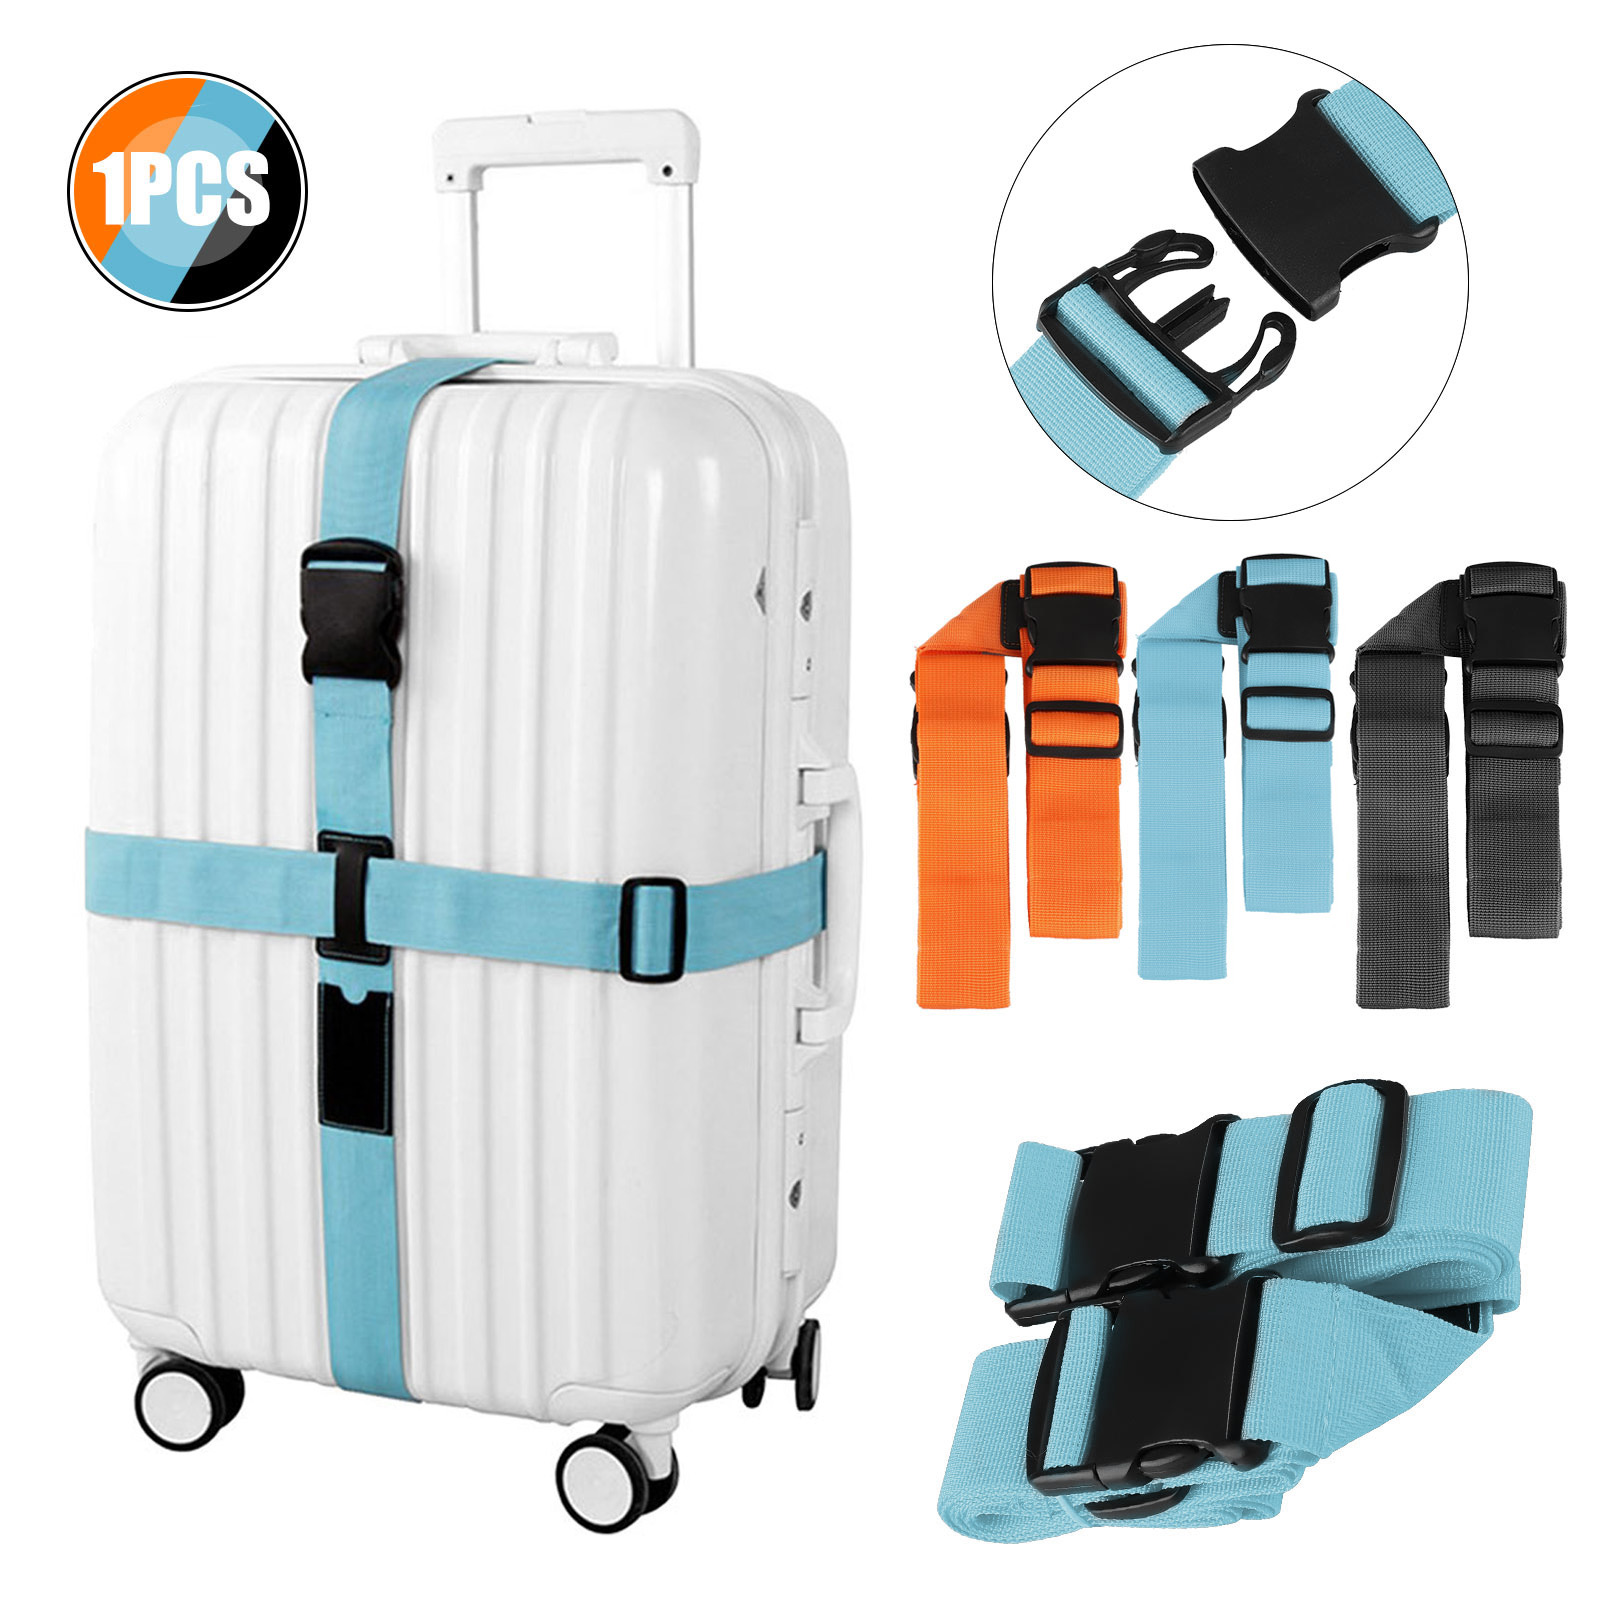 Heavy Duty Adjustable Luggage Strap Long Cross Travel Suitcase Packing ...